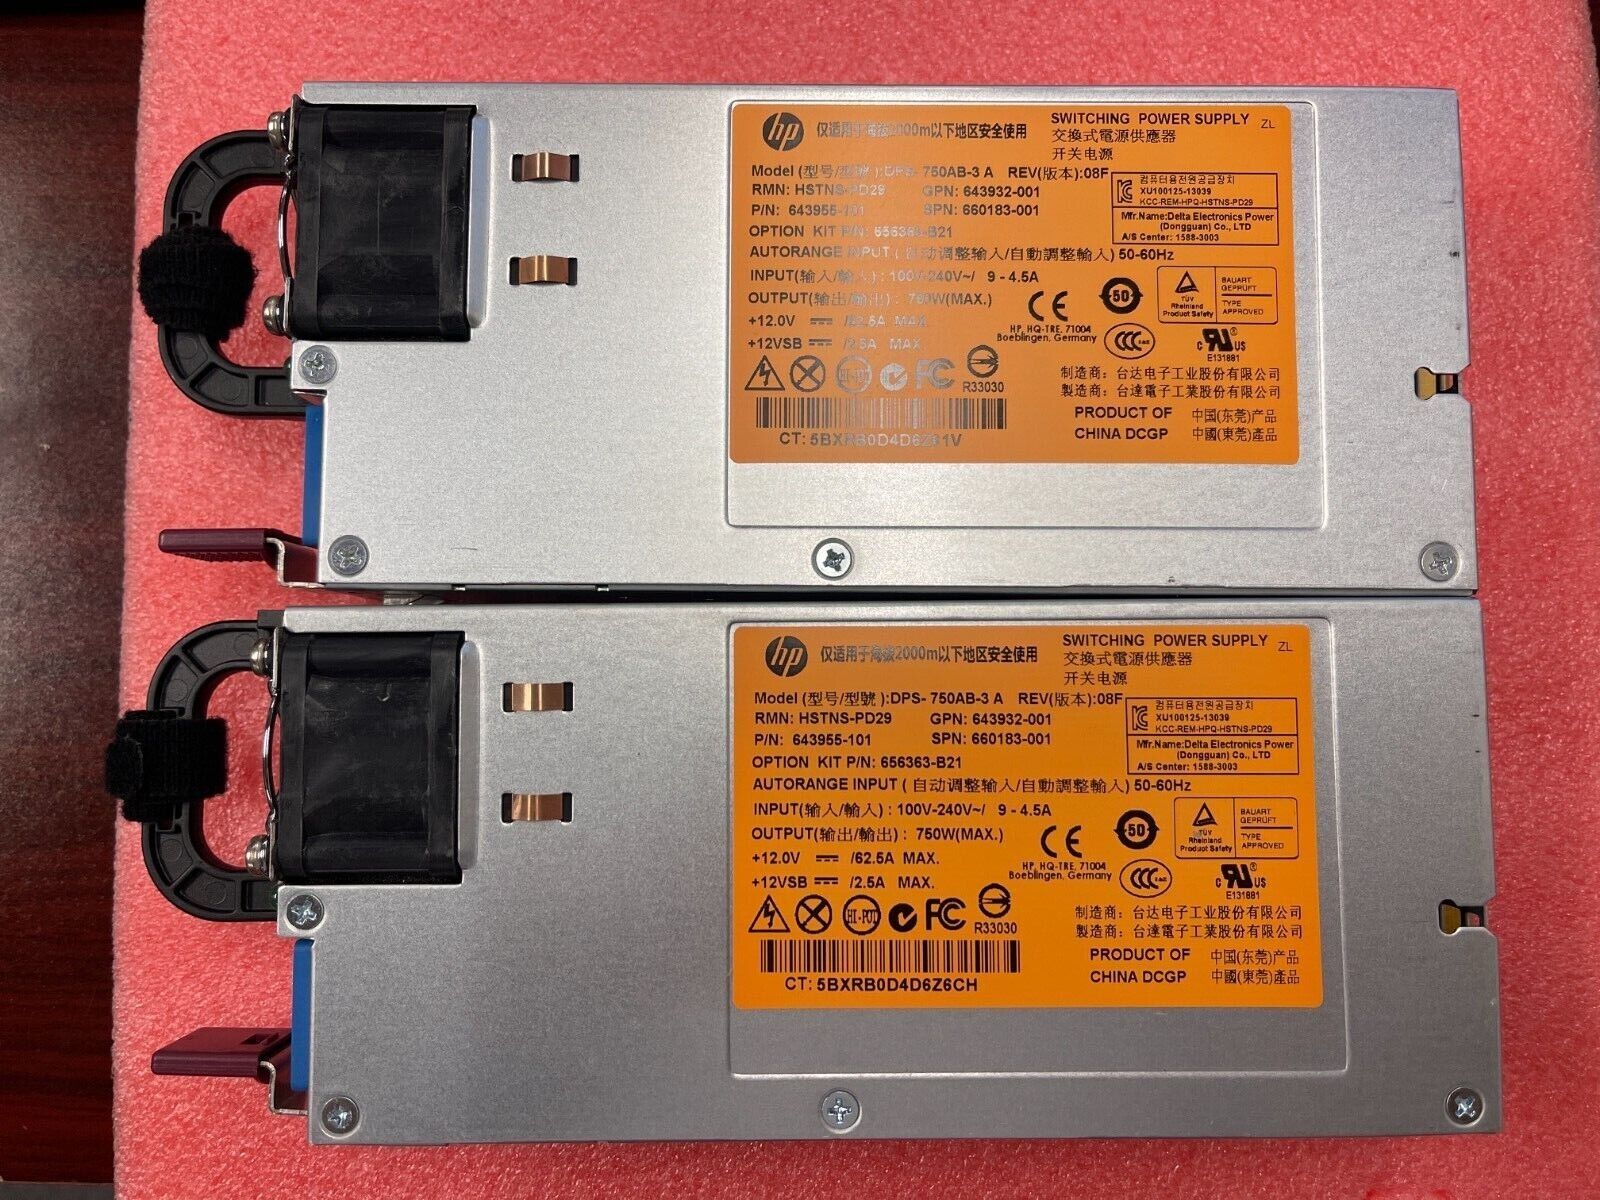 Lot of 2 HP 643955-101 750W Power Supply DPS-750AB-3 A HSTNS-PD29